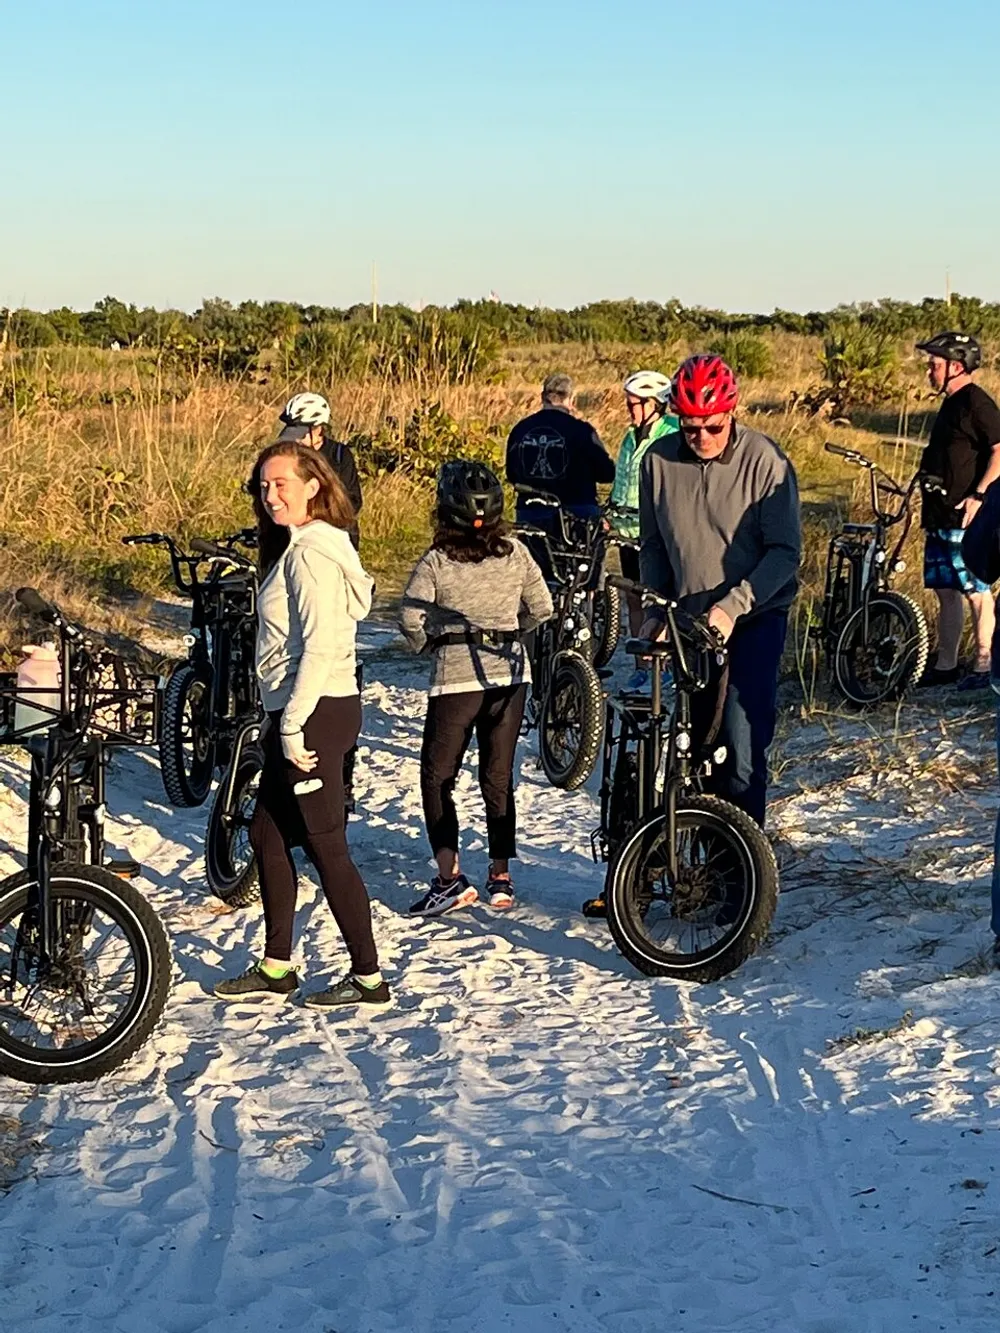 A group of people with bicycles are enjoying their time on a sandy trail under the bright sunlight